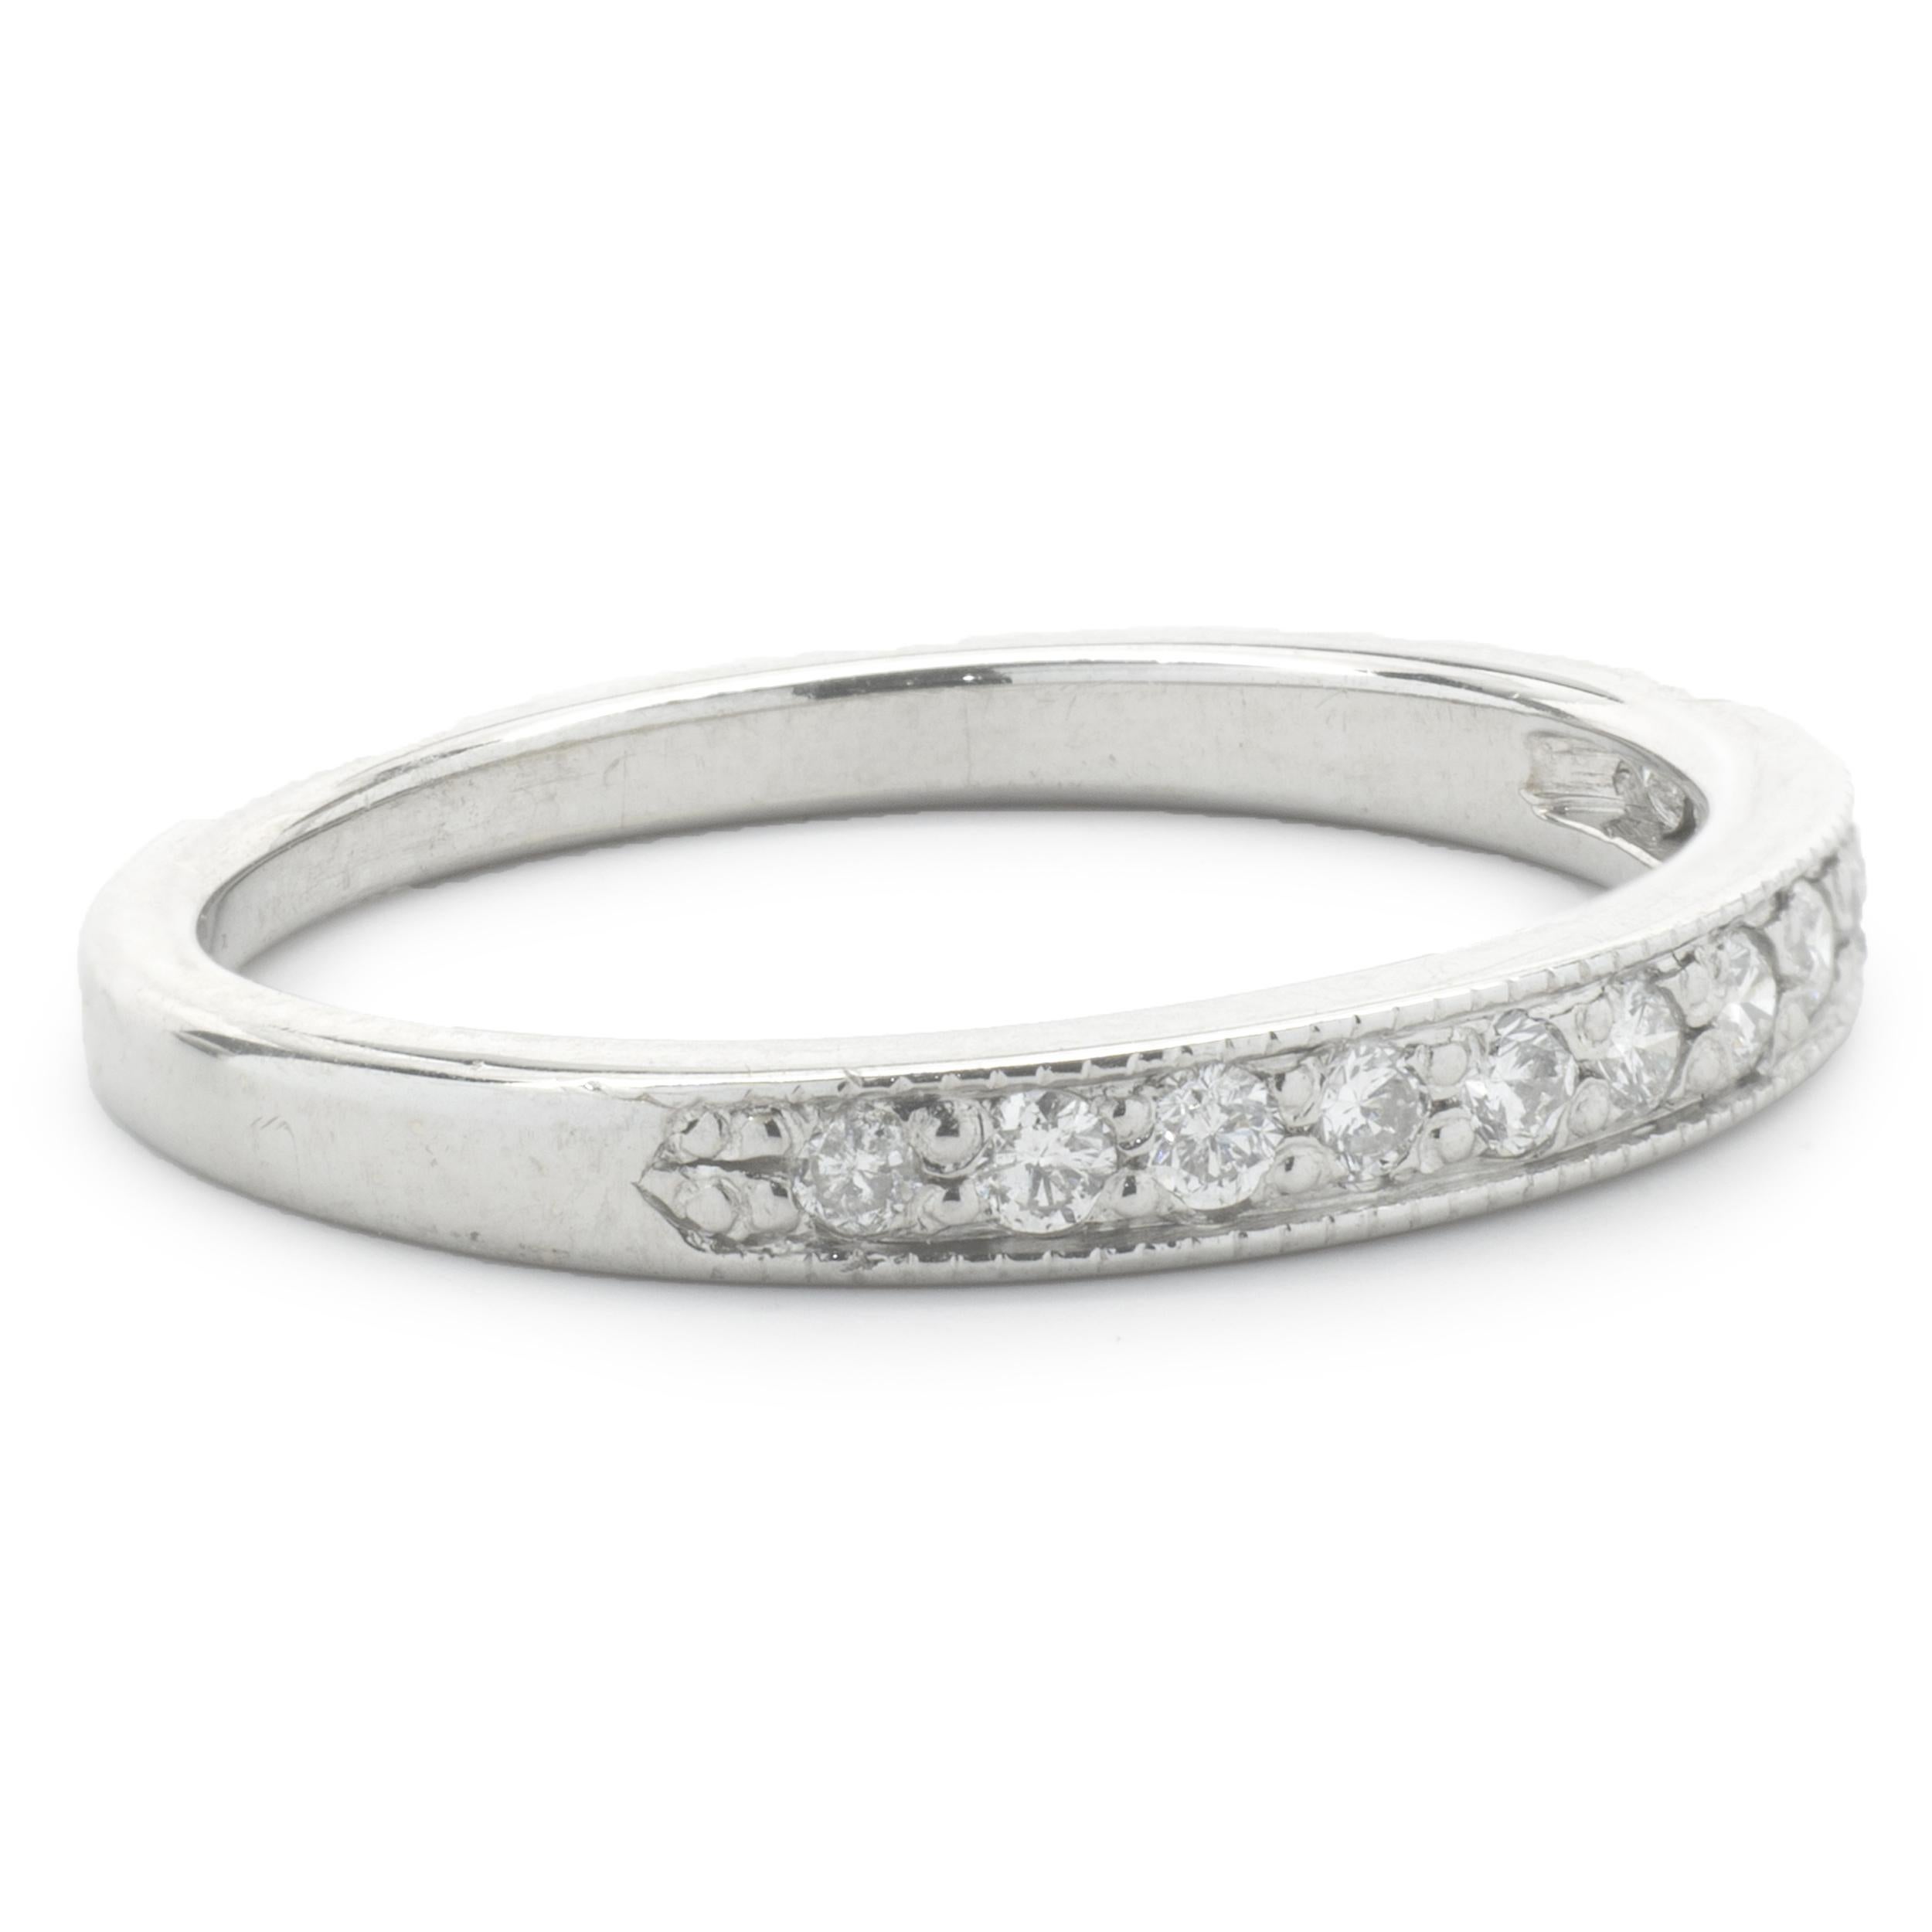 Designer: custom
Material: 14K white gold
Diamond: 13 round cut = .21cttw
Color: G 
Clarity: SI1
Ring size: 6.5 (please allow two additional shipping days for sizing requests)
Weight:  2.25 grams
